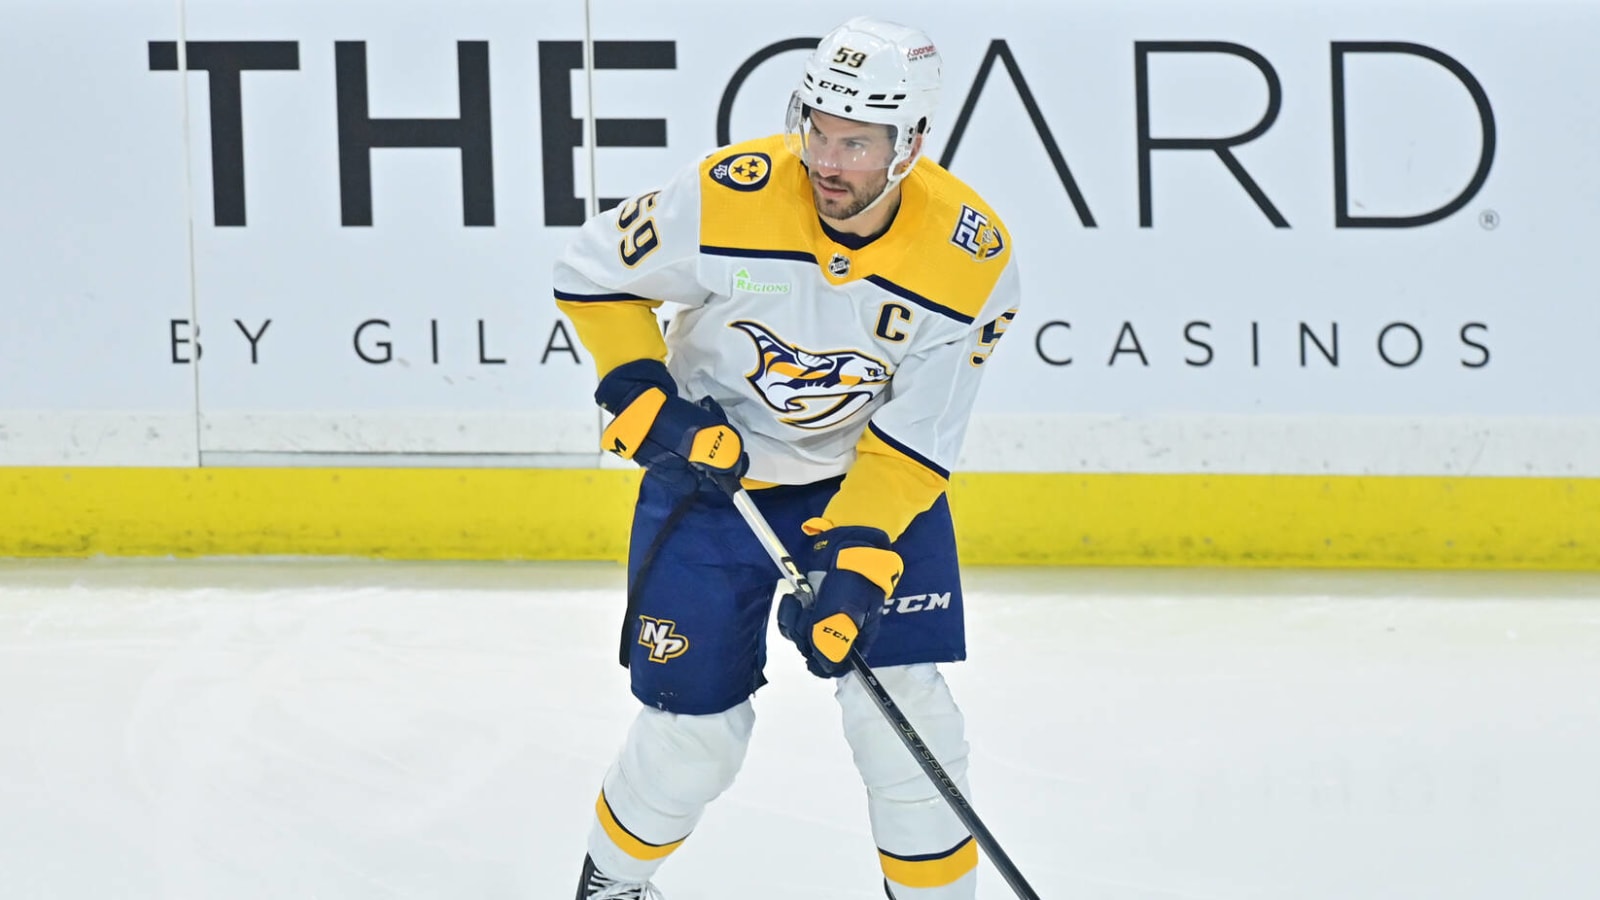 Roman Josi Becomes First Player To Accomplish This Notable Feat